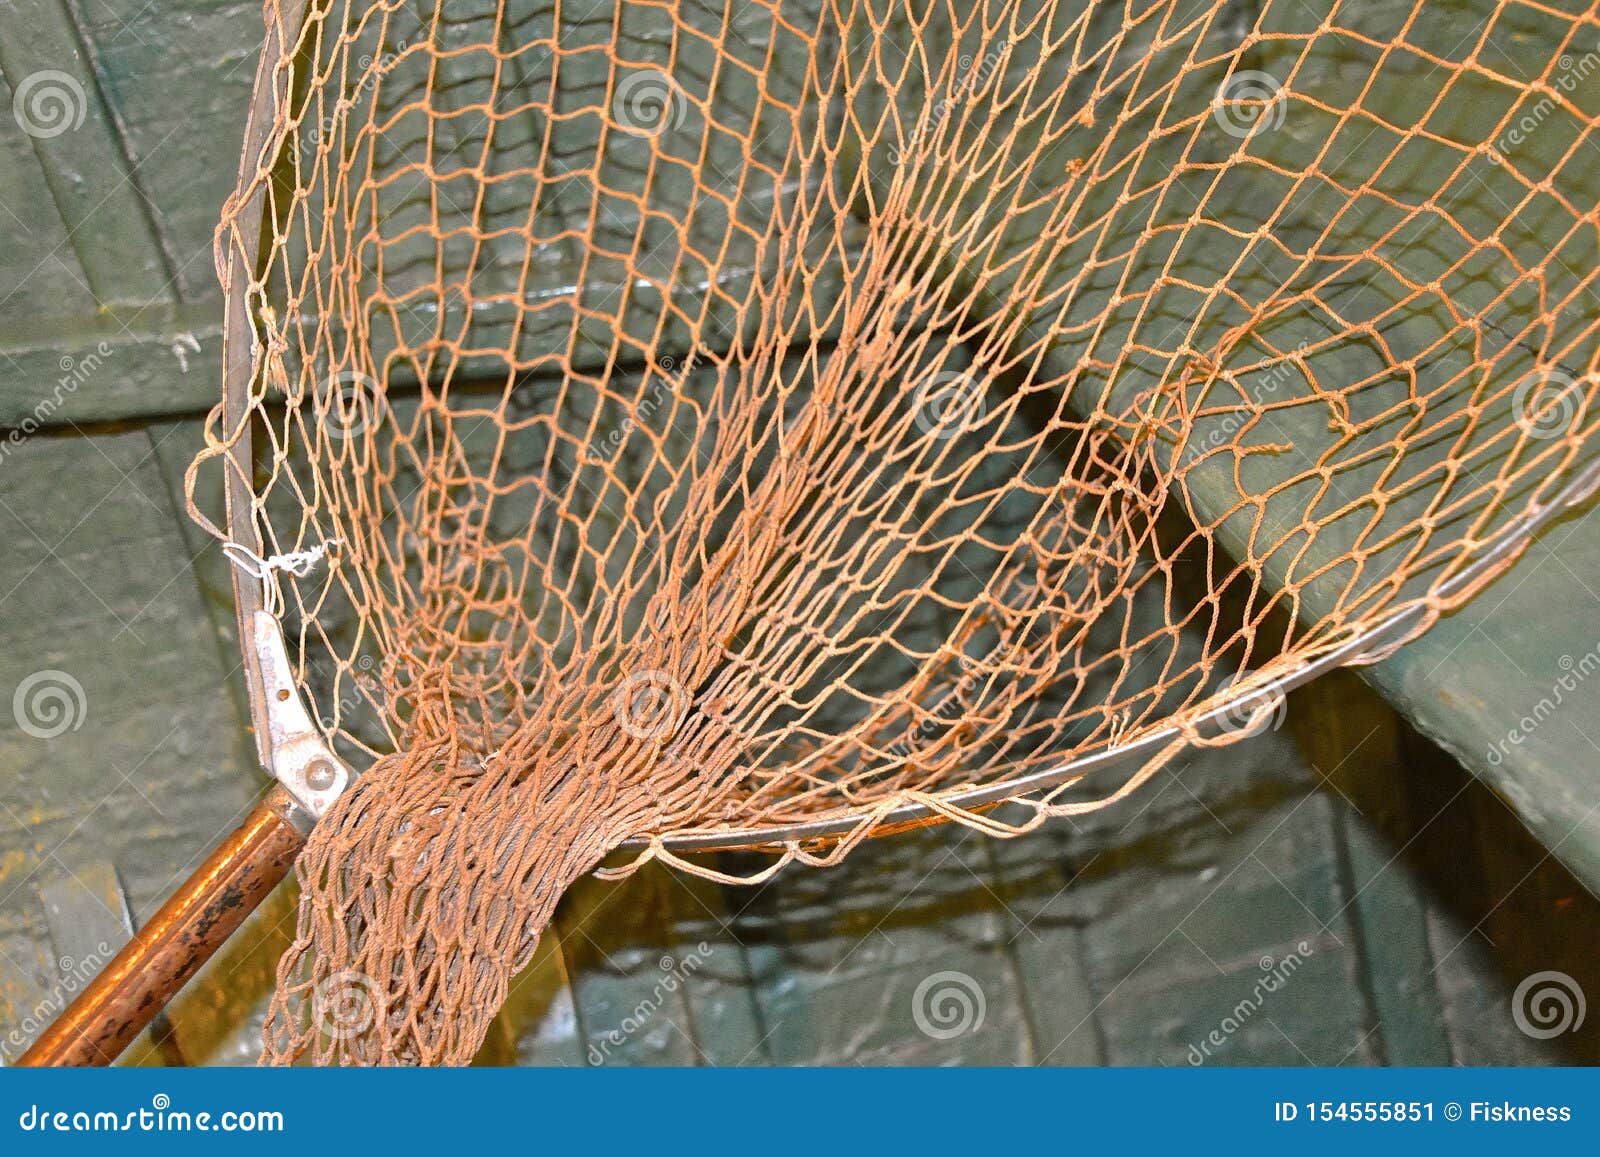 108 Old Fish Landing Net Stock Photos - Free & Royalty-Free Stock Photos  from Dreamstime